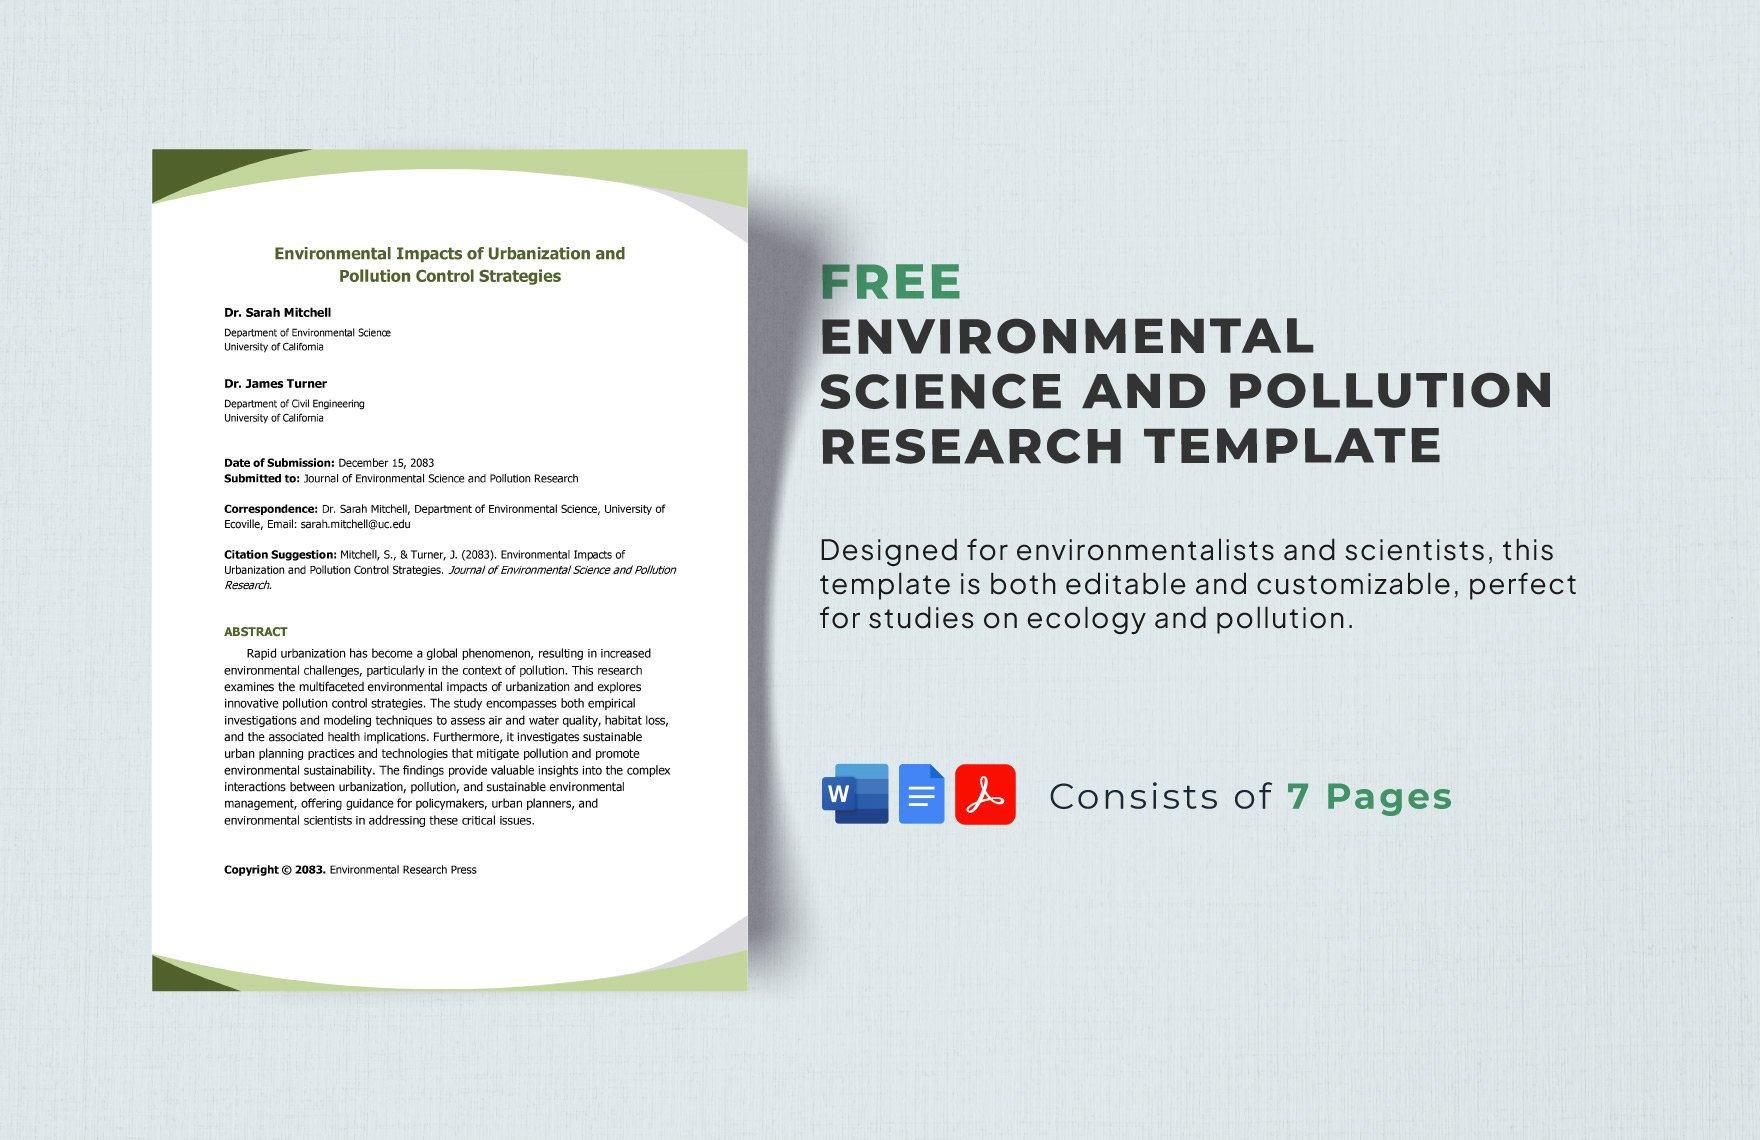 Environmental Science and Pollution Research Template